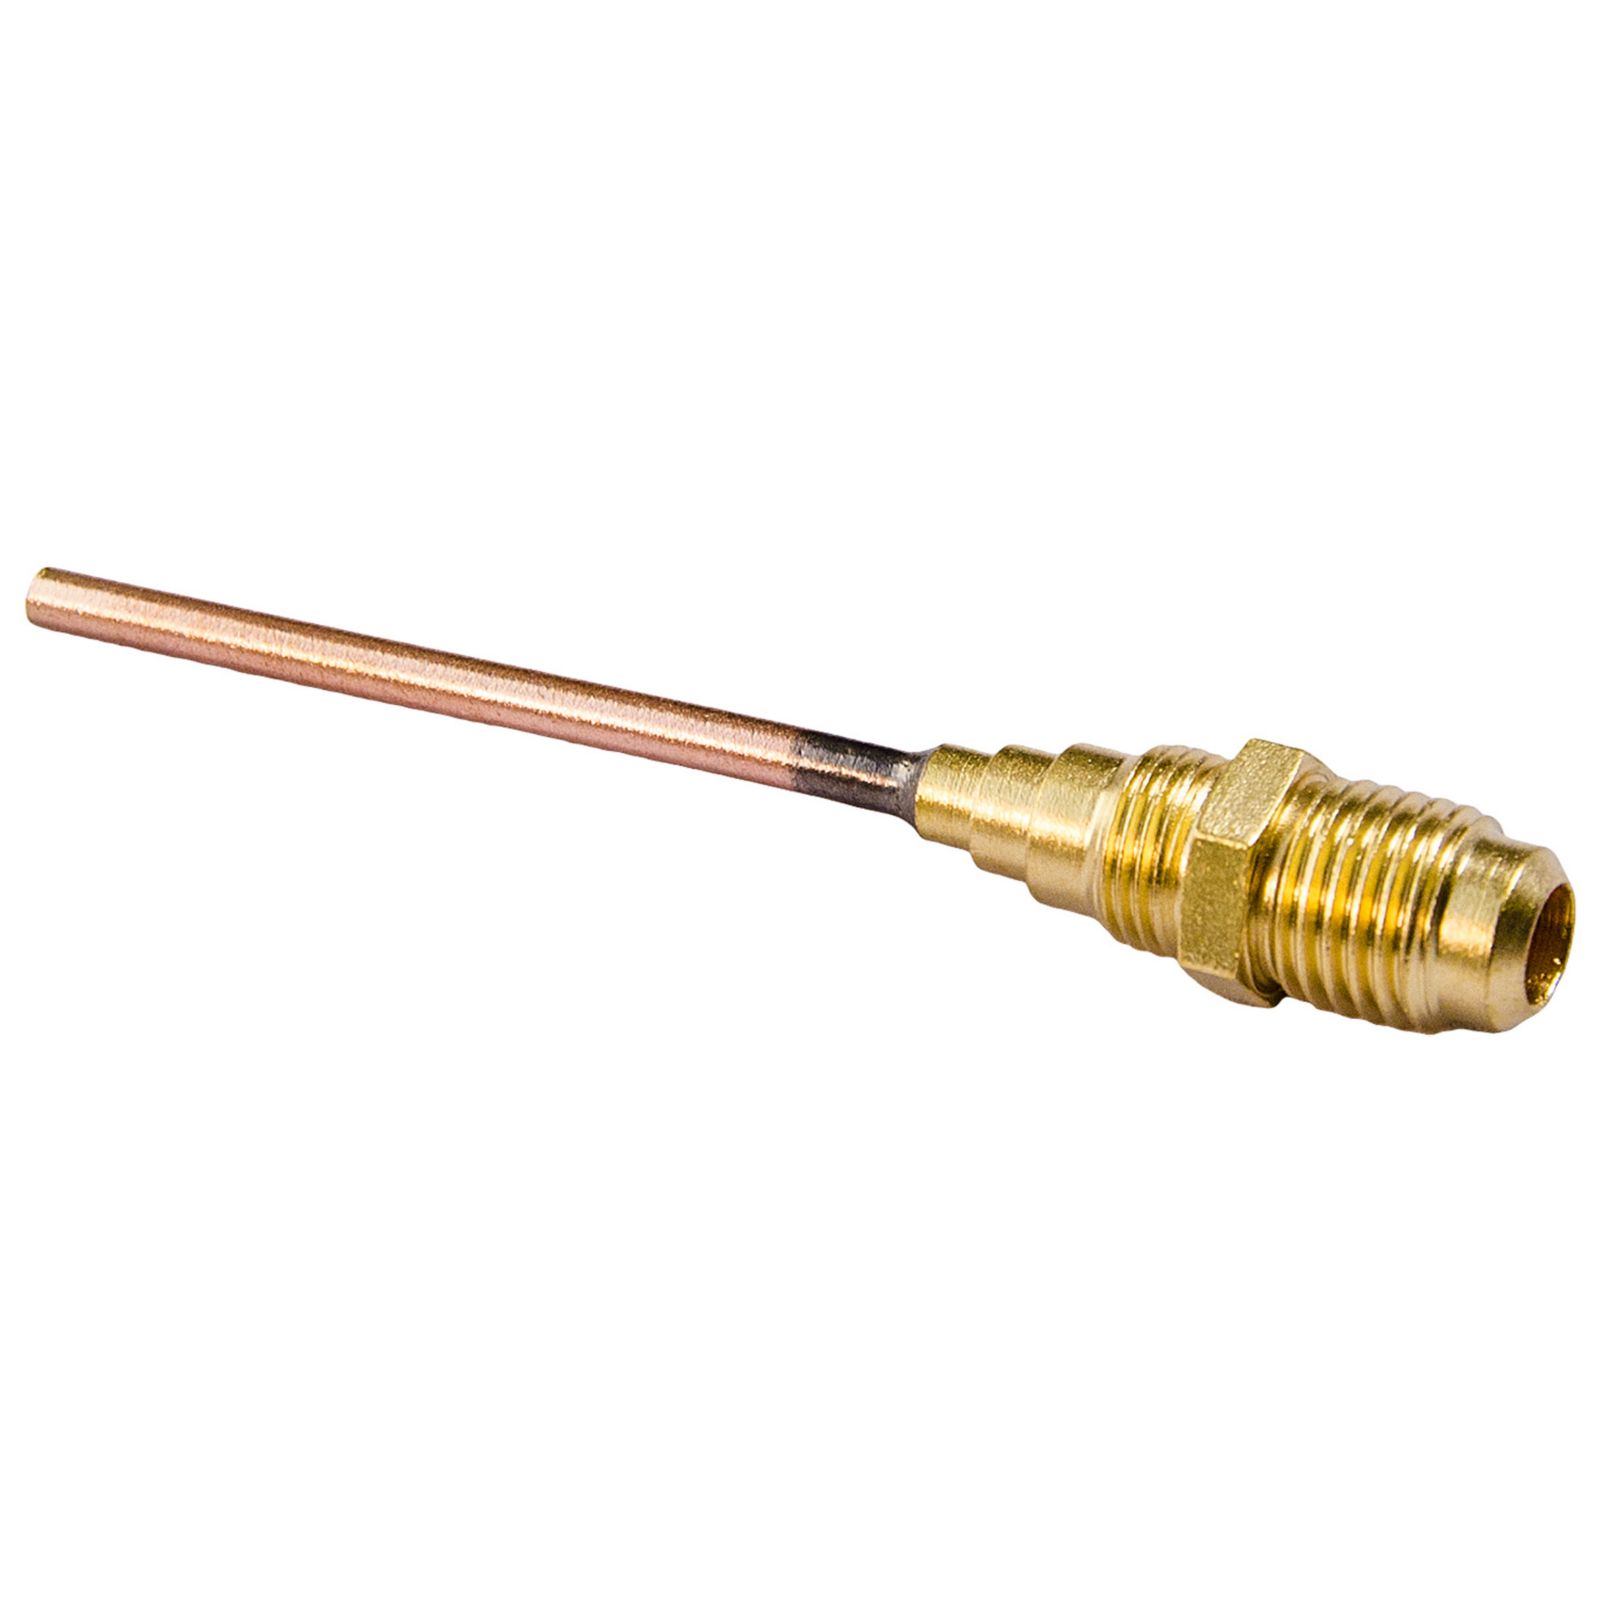 C&D Valve CD3608 - Premium Line Service Valve, Male Flare Access Fitting, 1/4", With Copper Tube Extension, 1/8"